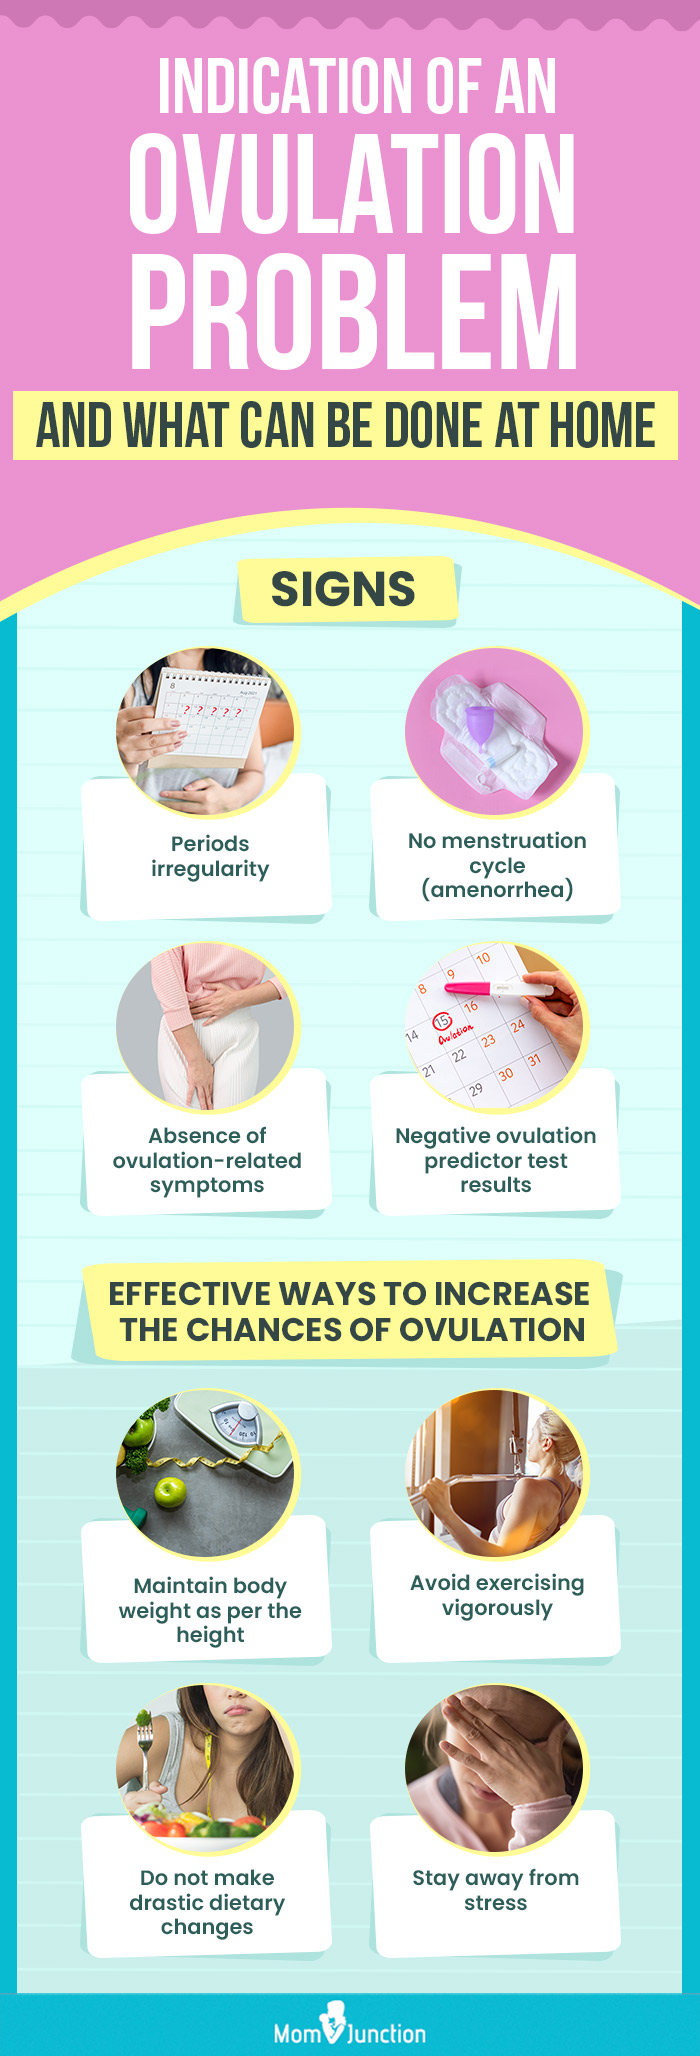 10 Signs Your Ovulation Period Is Over